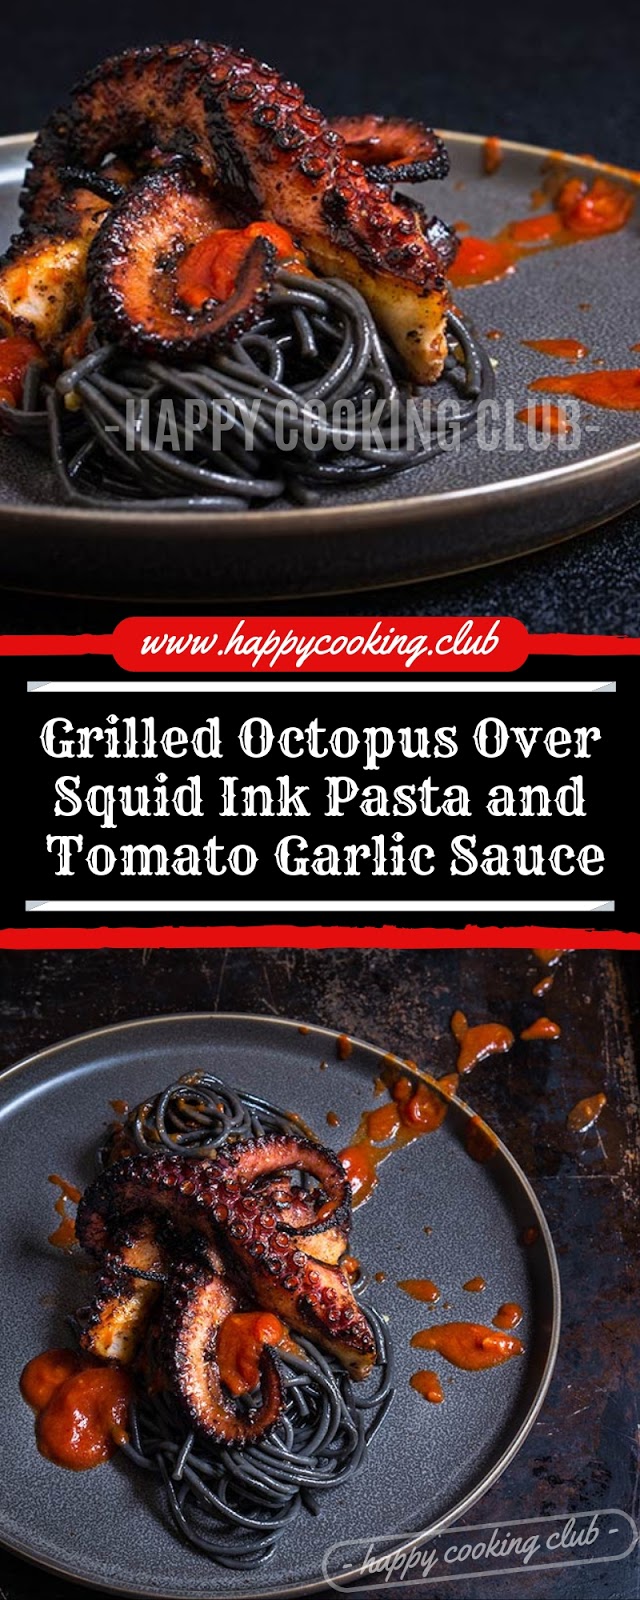 Grilled Octopus Over Squid Ink Pasta and Tomato Garlic Sauce